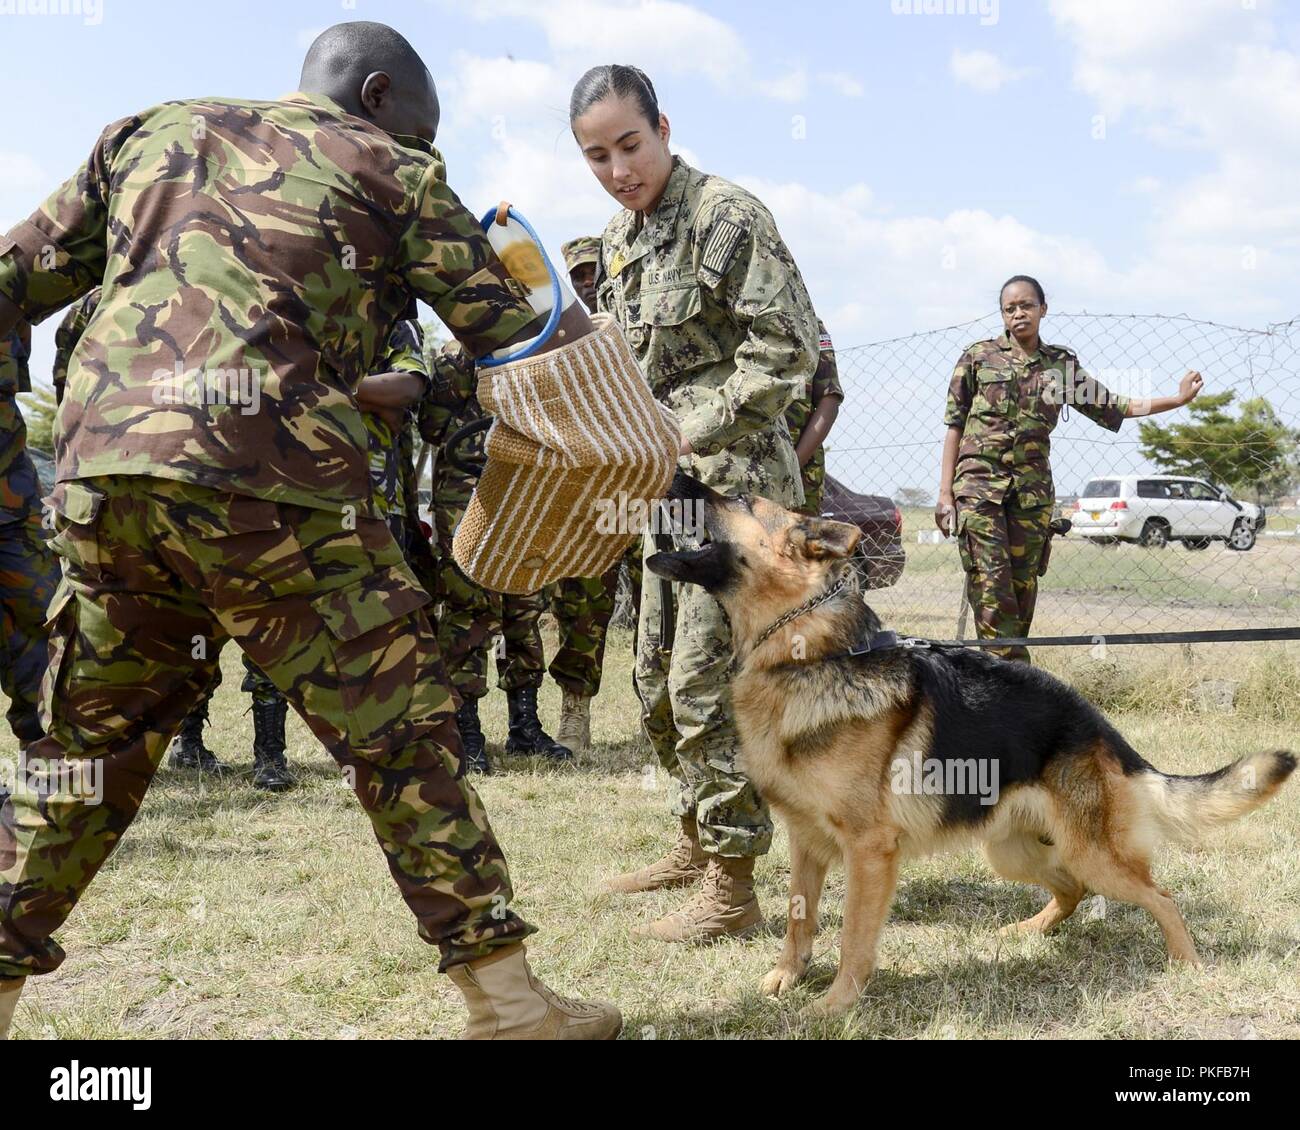 Master at Arms 1st Class Kristina Vargas, the Kennel Master assigned to Camp Lemonnier, conducts patrol work and demonstrates different techniques for members of the Kenyan Defense Force's 1st Canine Regiment during a Military Working Dog knowledge exchange, in Nairobi, Kenya, August 7, 2018. The exchange gave a chance for American and Kenyan forces to learn and work with each other to have a better understanding of each other's capabilities. Stock Photo